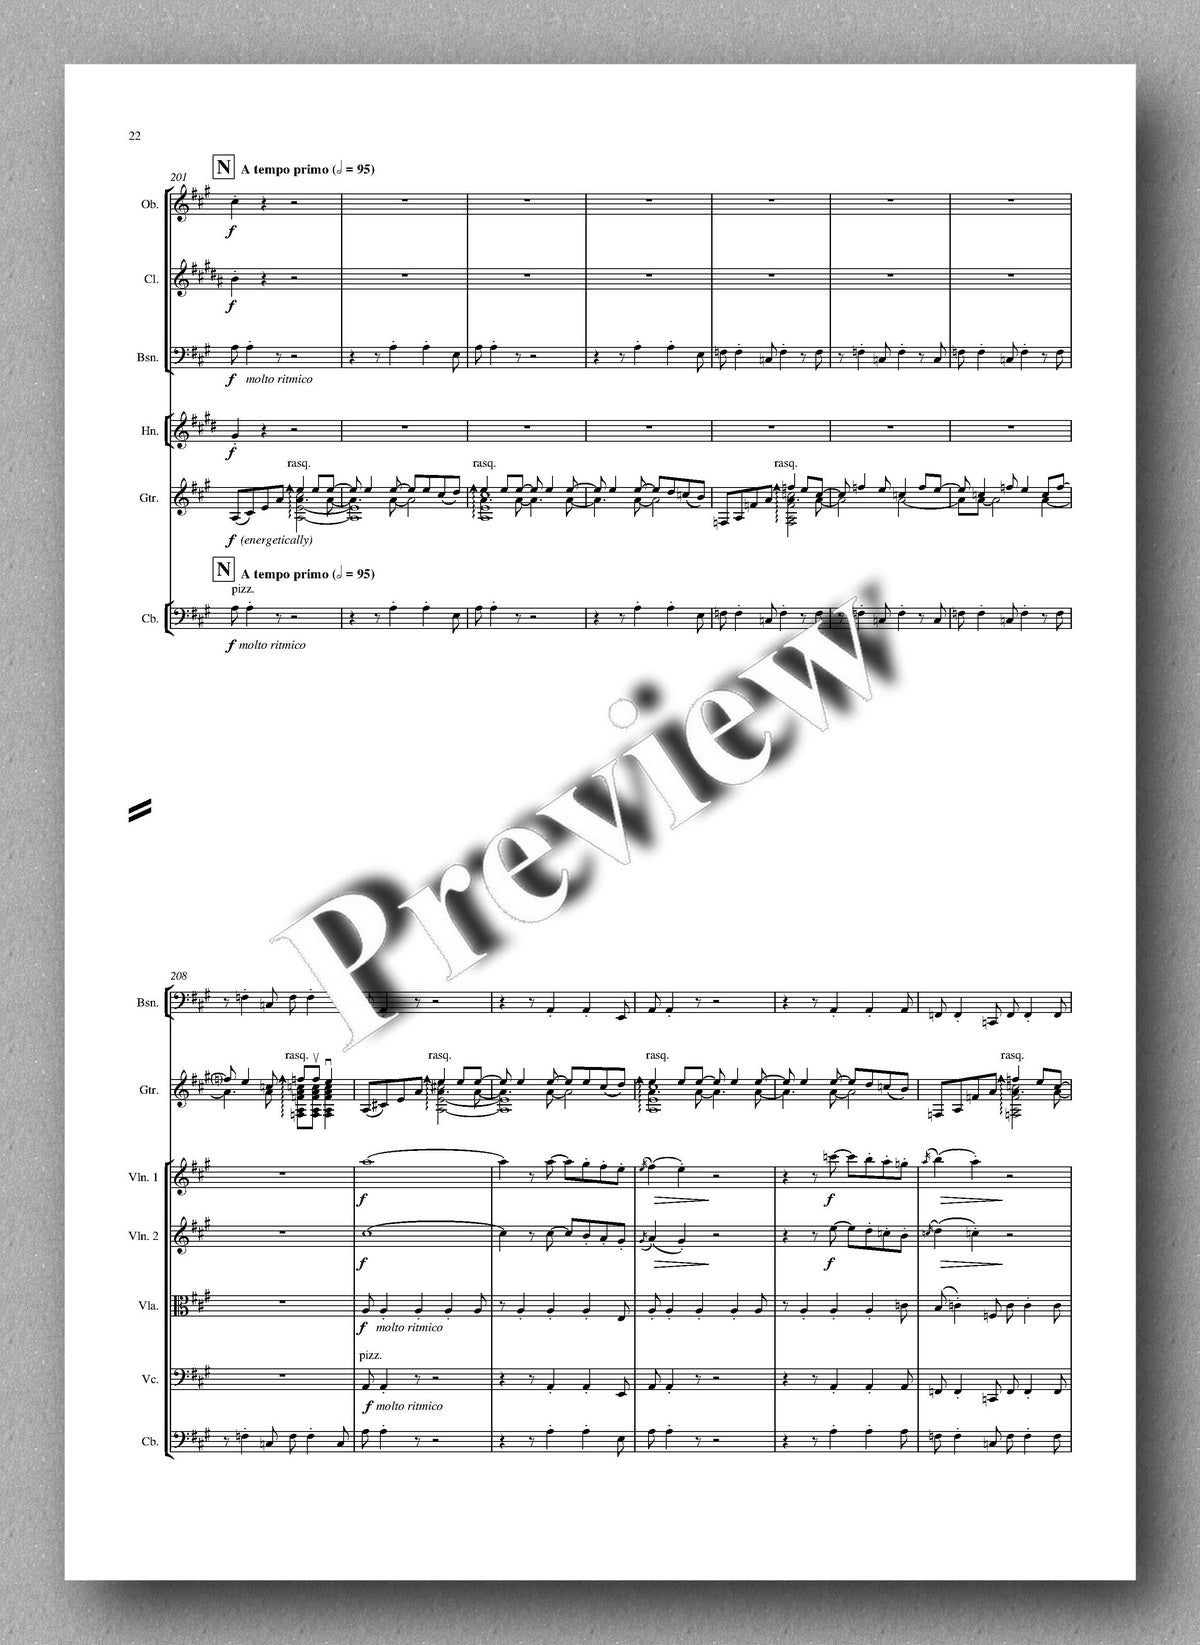 Roland Chadwick - Concerto Brasileiras - preview of the  music score 3